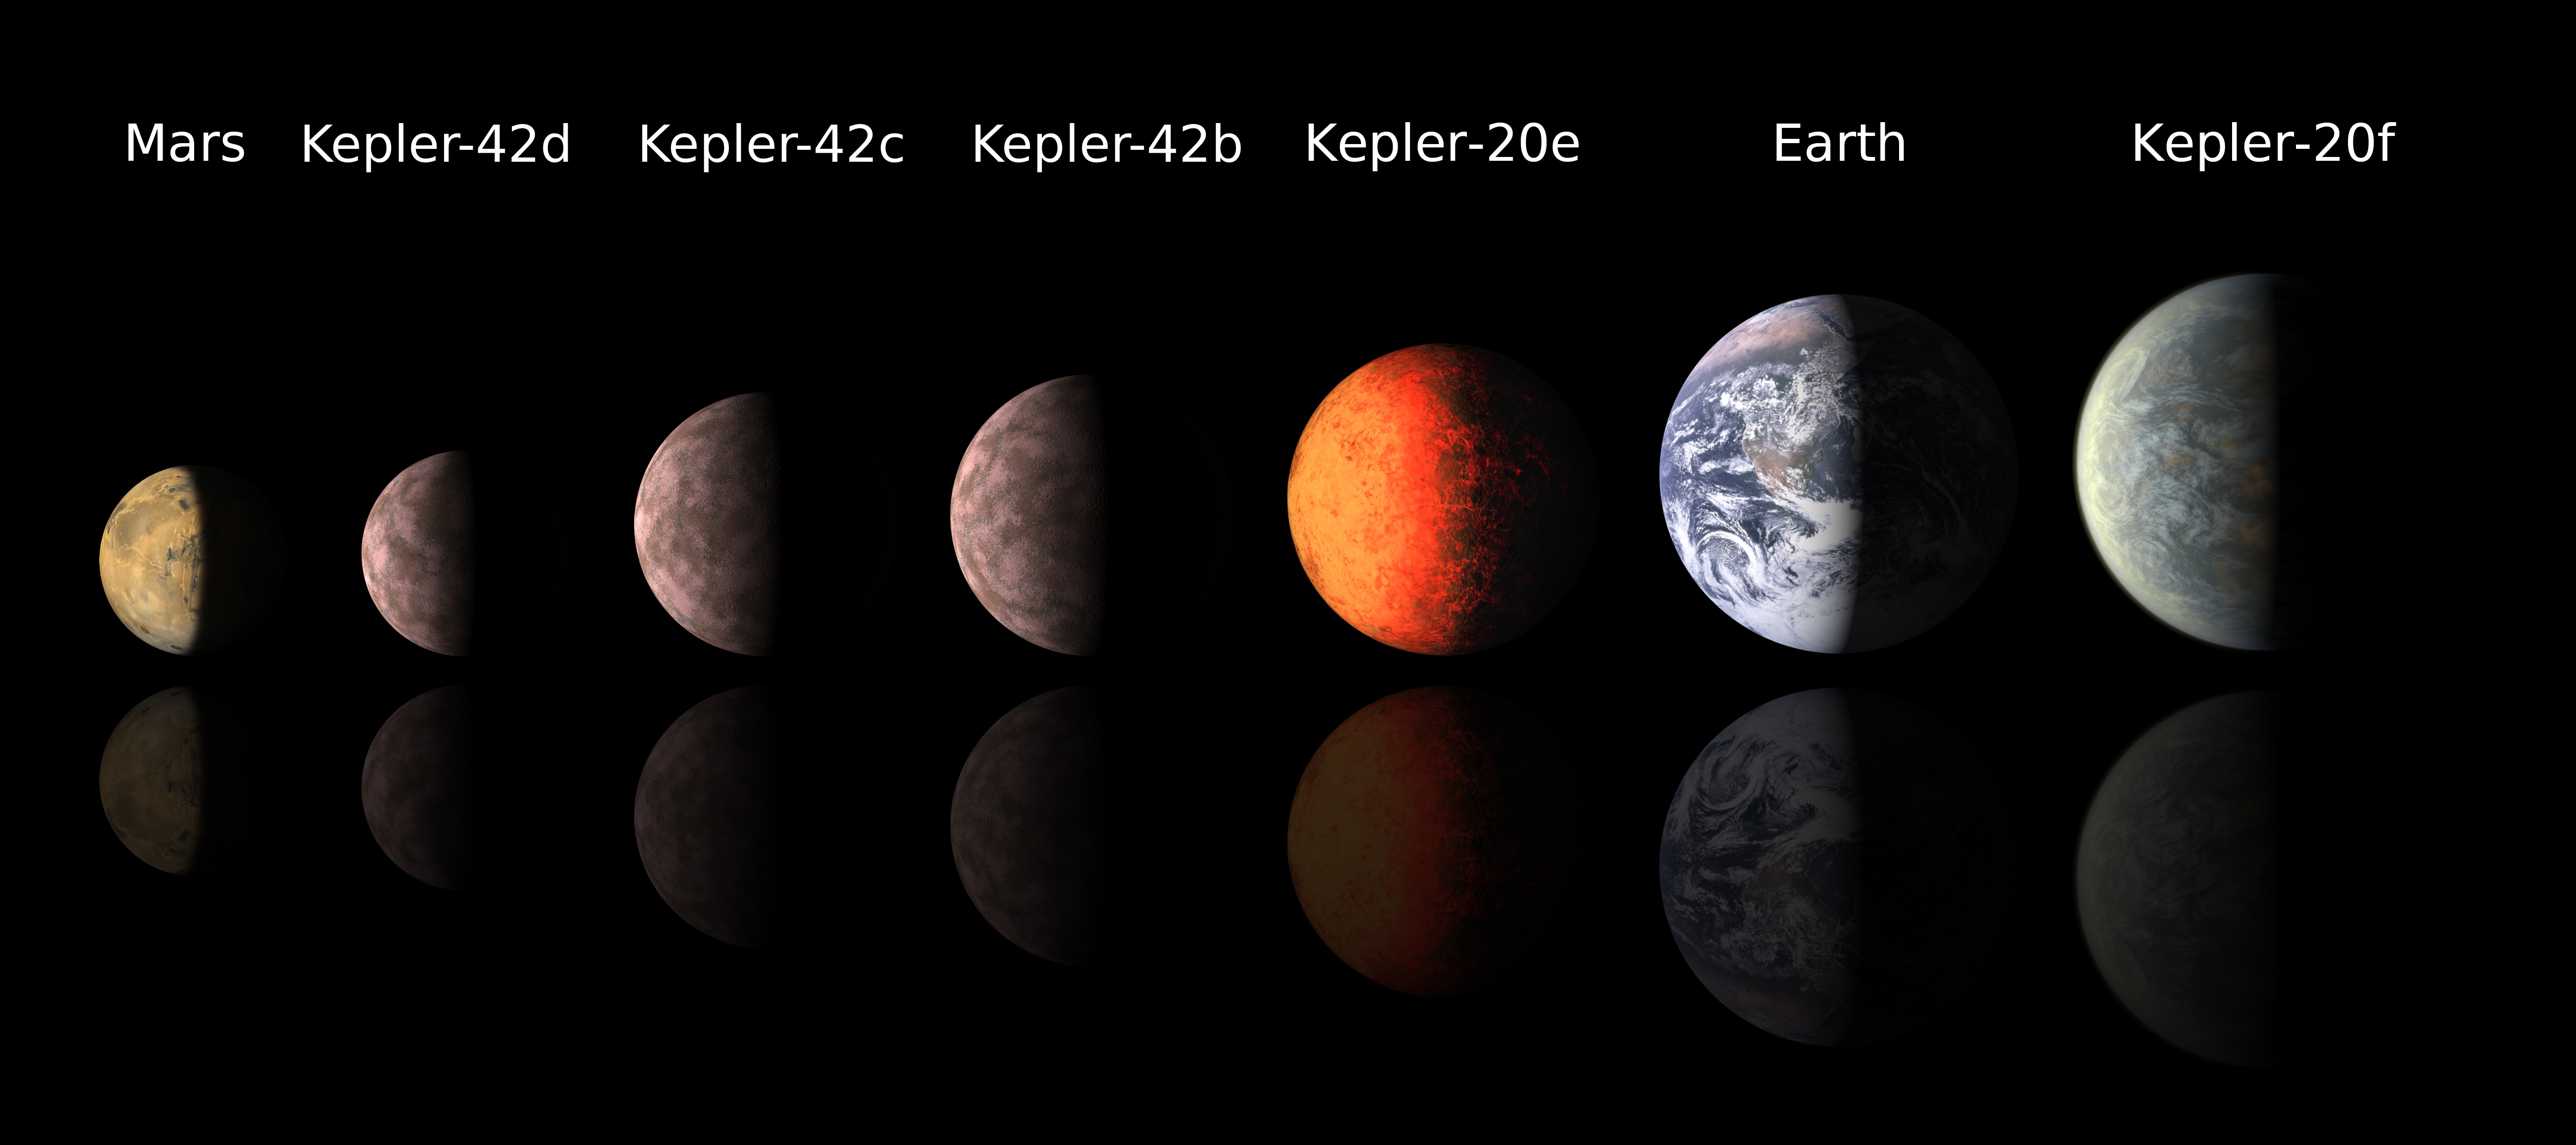 https://upload.wikimedia.org/wikipedia/commons/6/62/Comparing_the_size_of_Earth%2C_Mars%2C_and_exoplanets_of_Kepler-20_and_Kepler-42.jpg